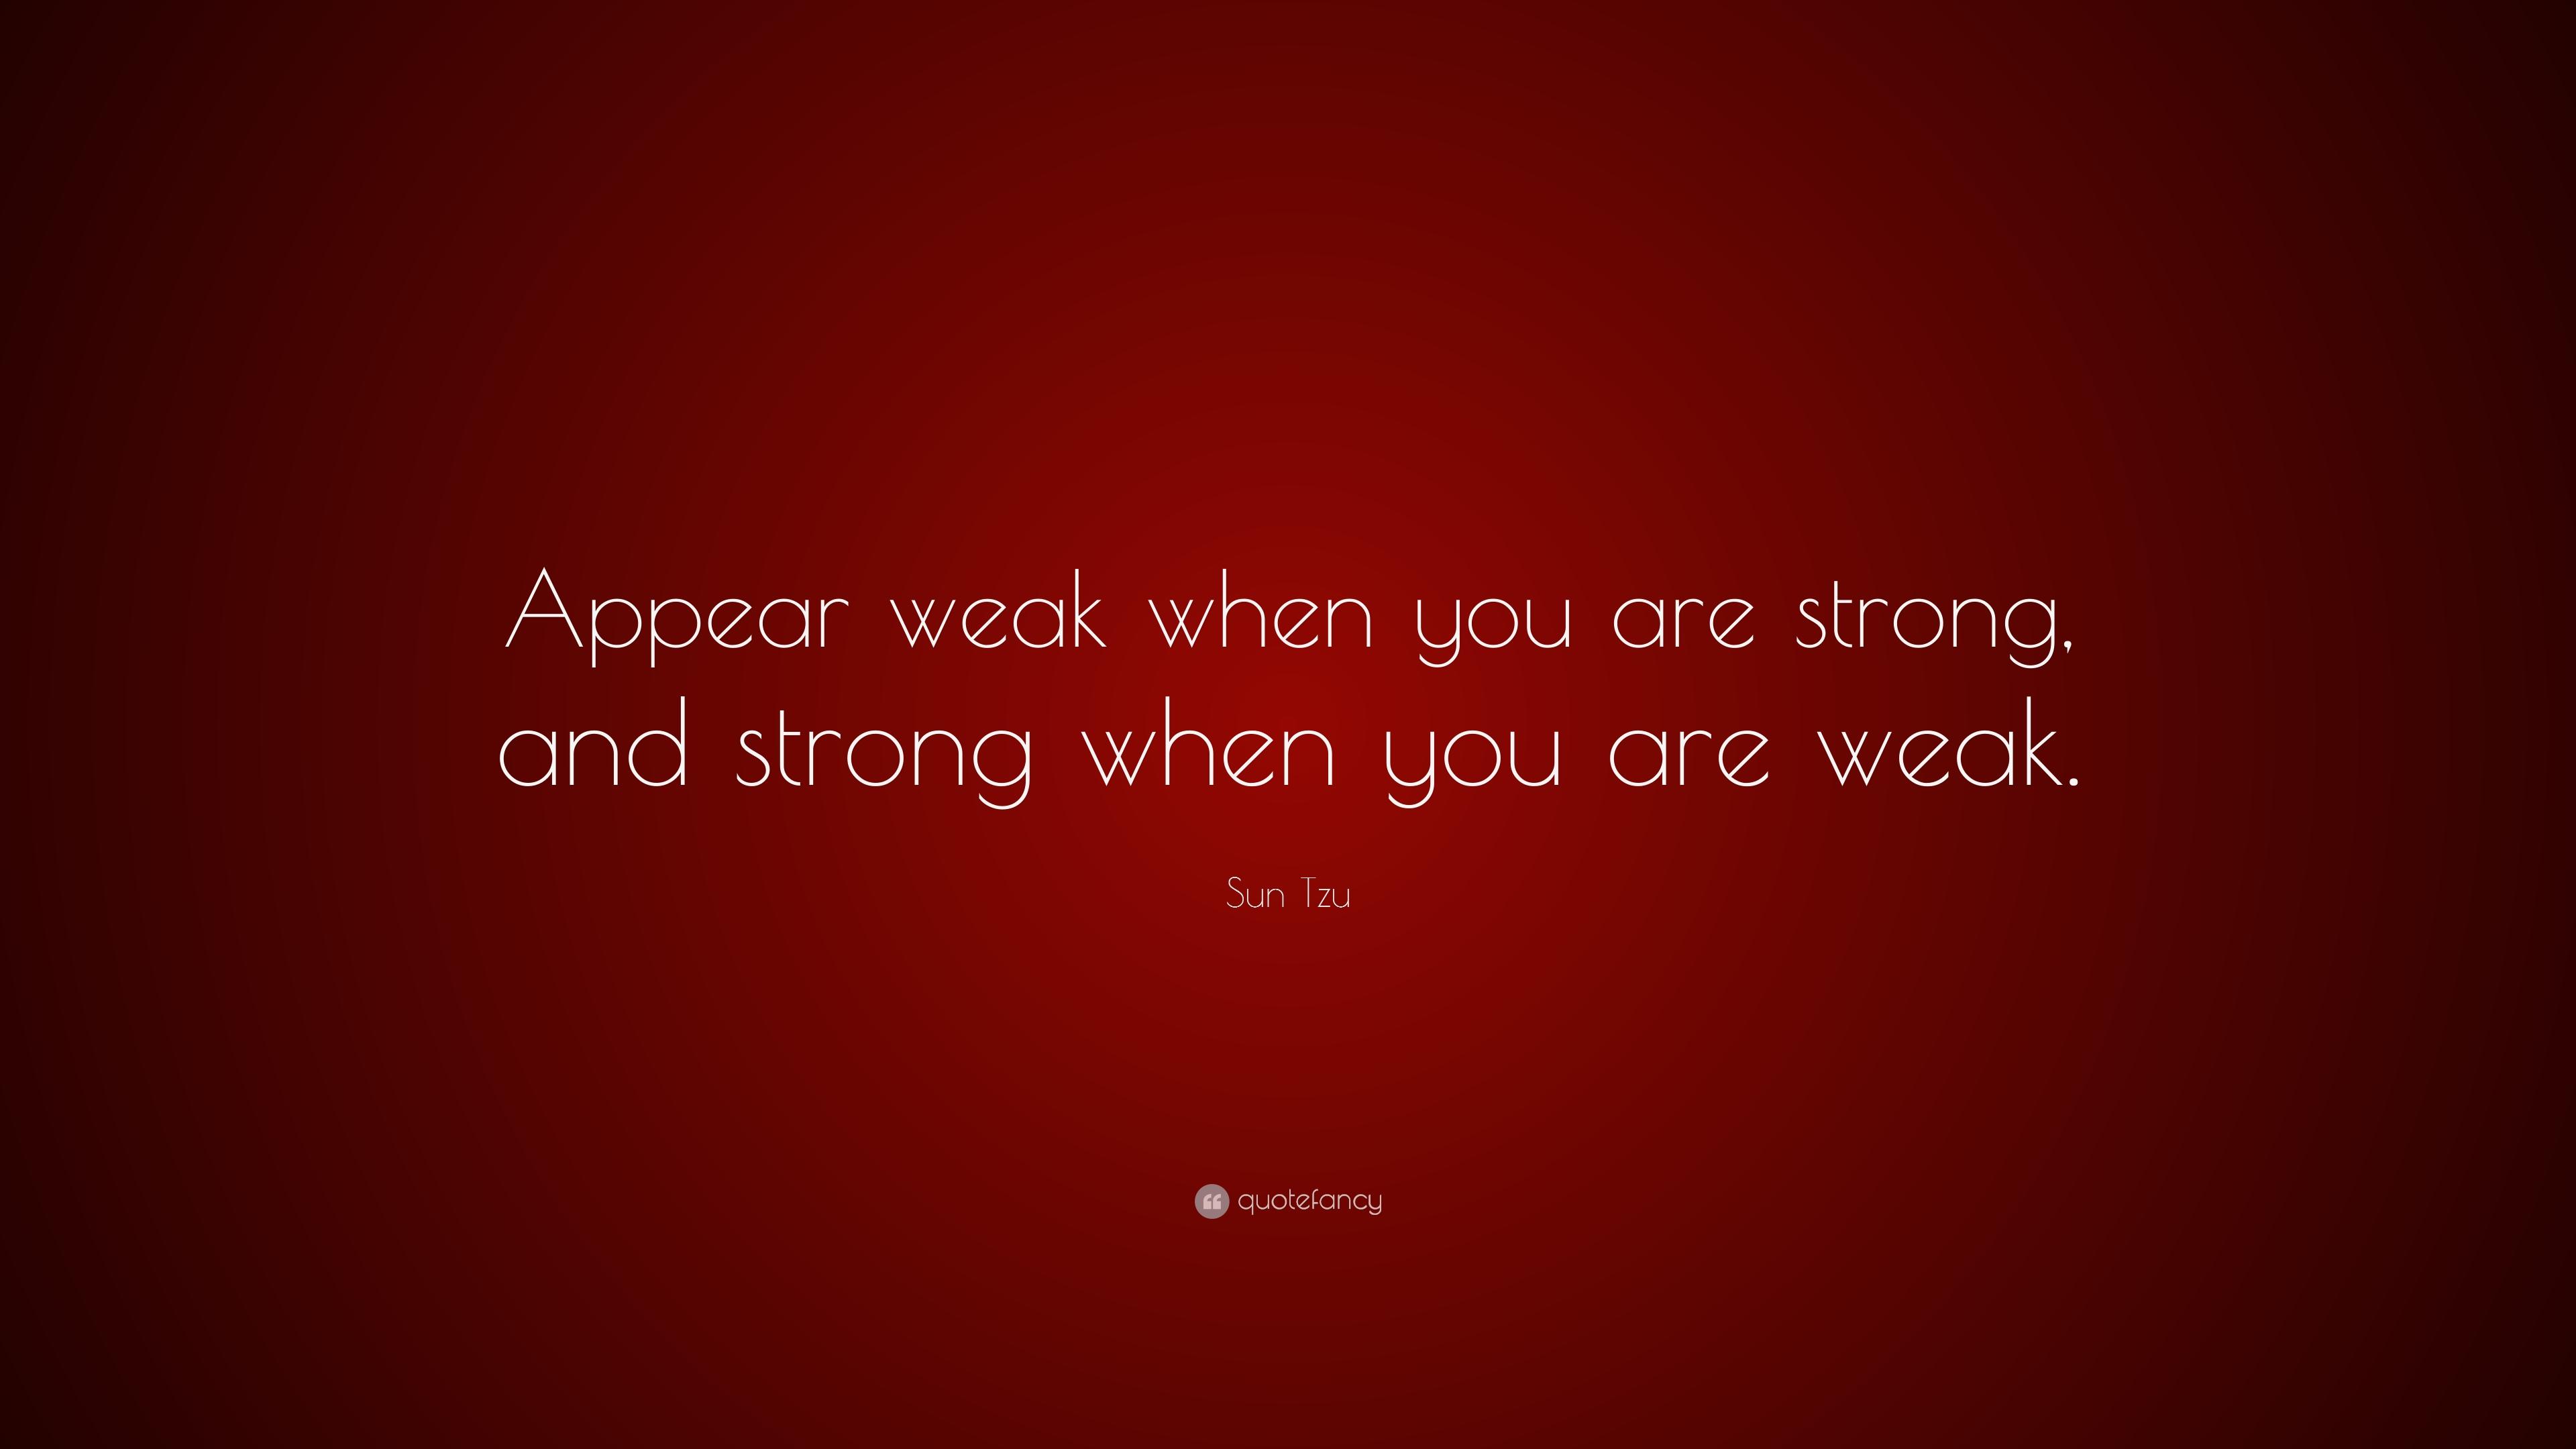 Sun Tzu Quote: “Appear weak when you are strong, and strong